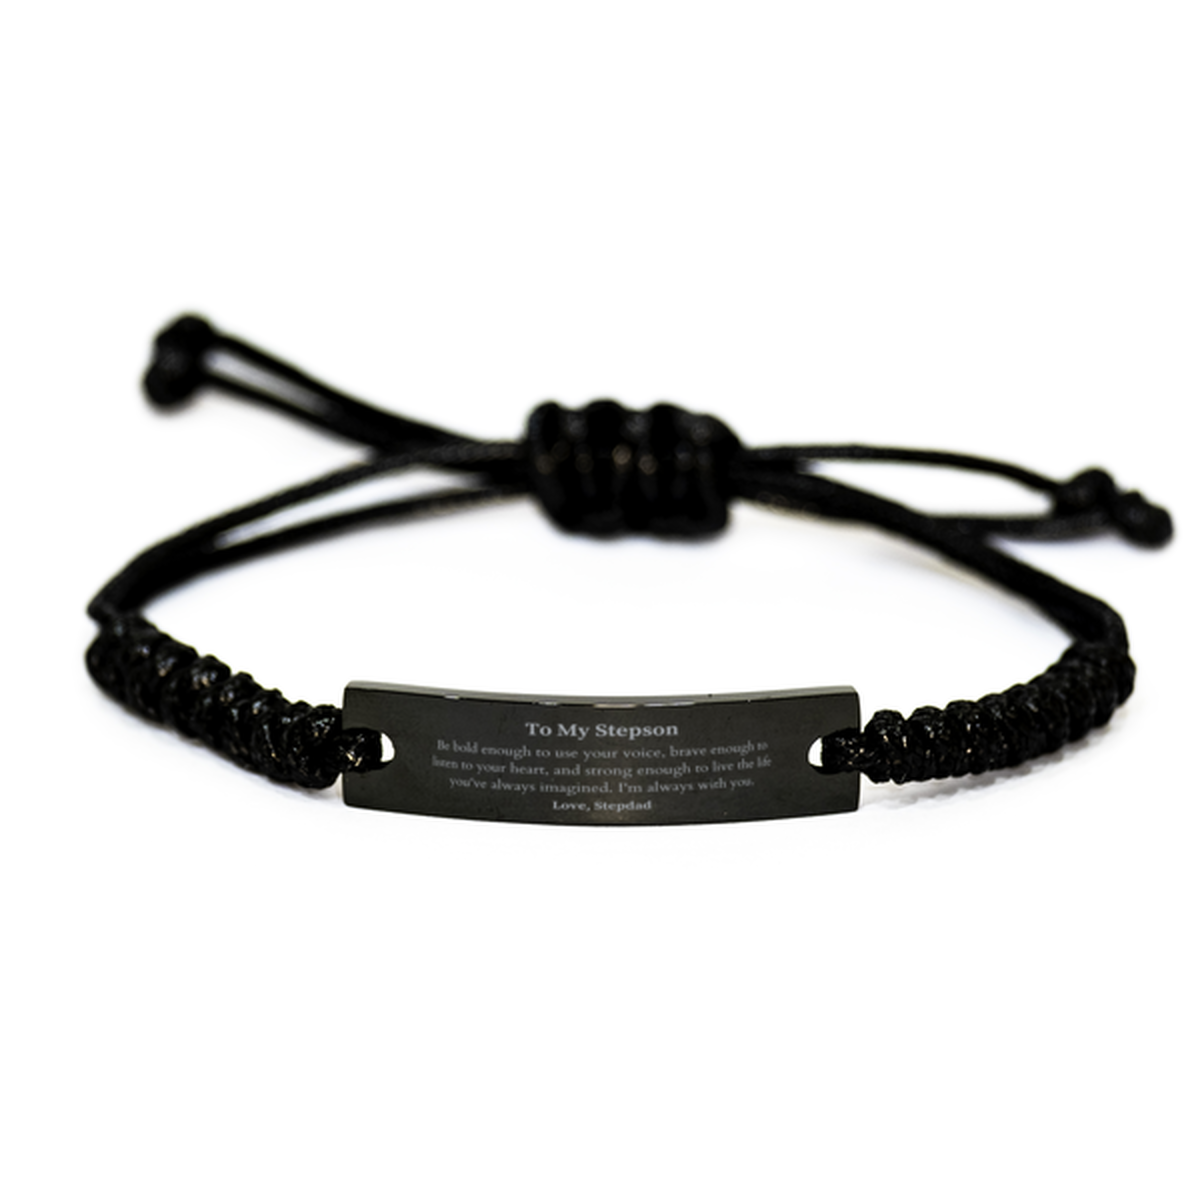 Keepsake Stepson Black Rope Bracelet Gift Idea Graduation Christmas Birthday Stepson from Stepdad, Stepson Be bold enough to use your voice, brave enough to listen to your heart. Love, Stepdad